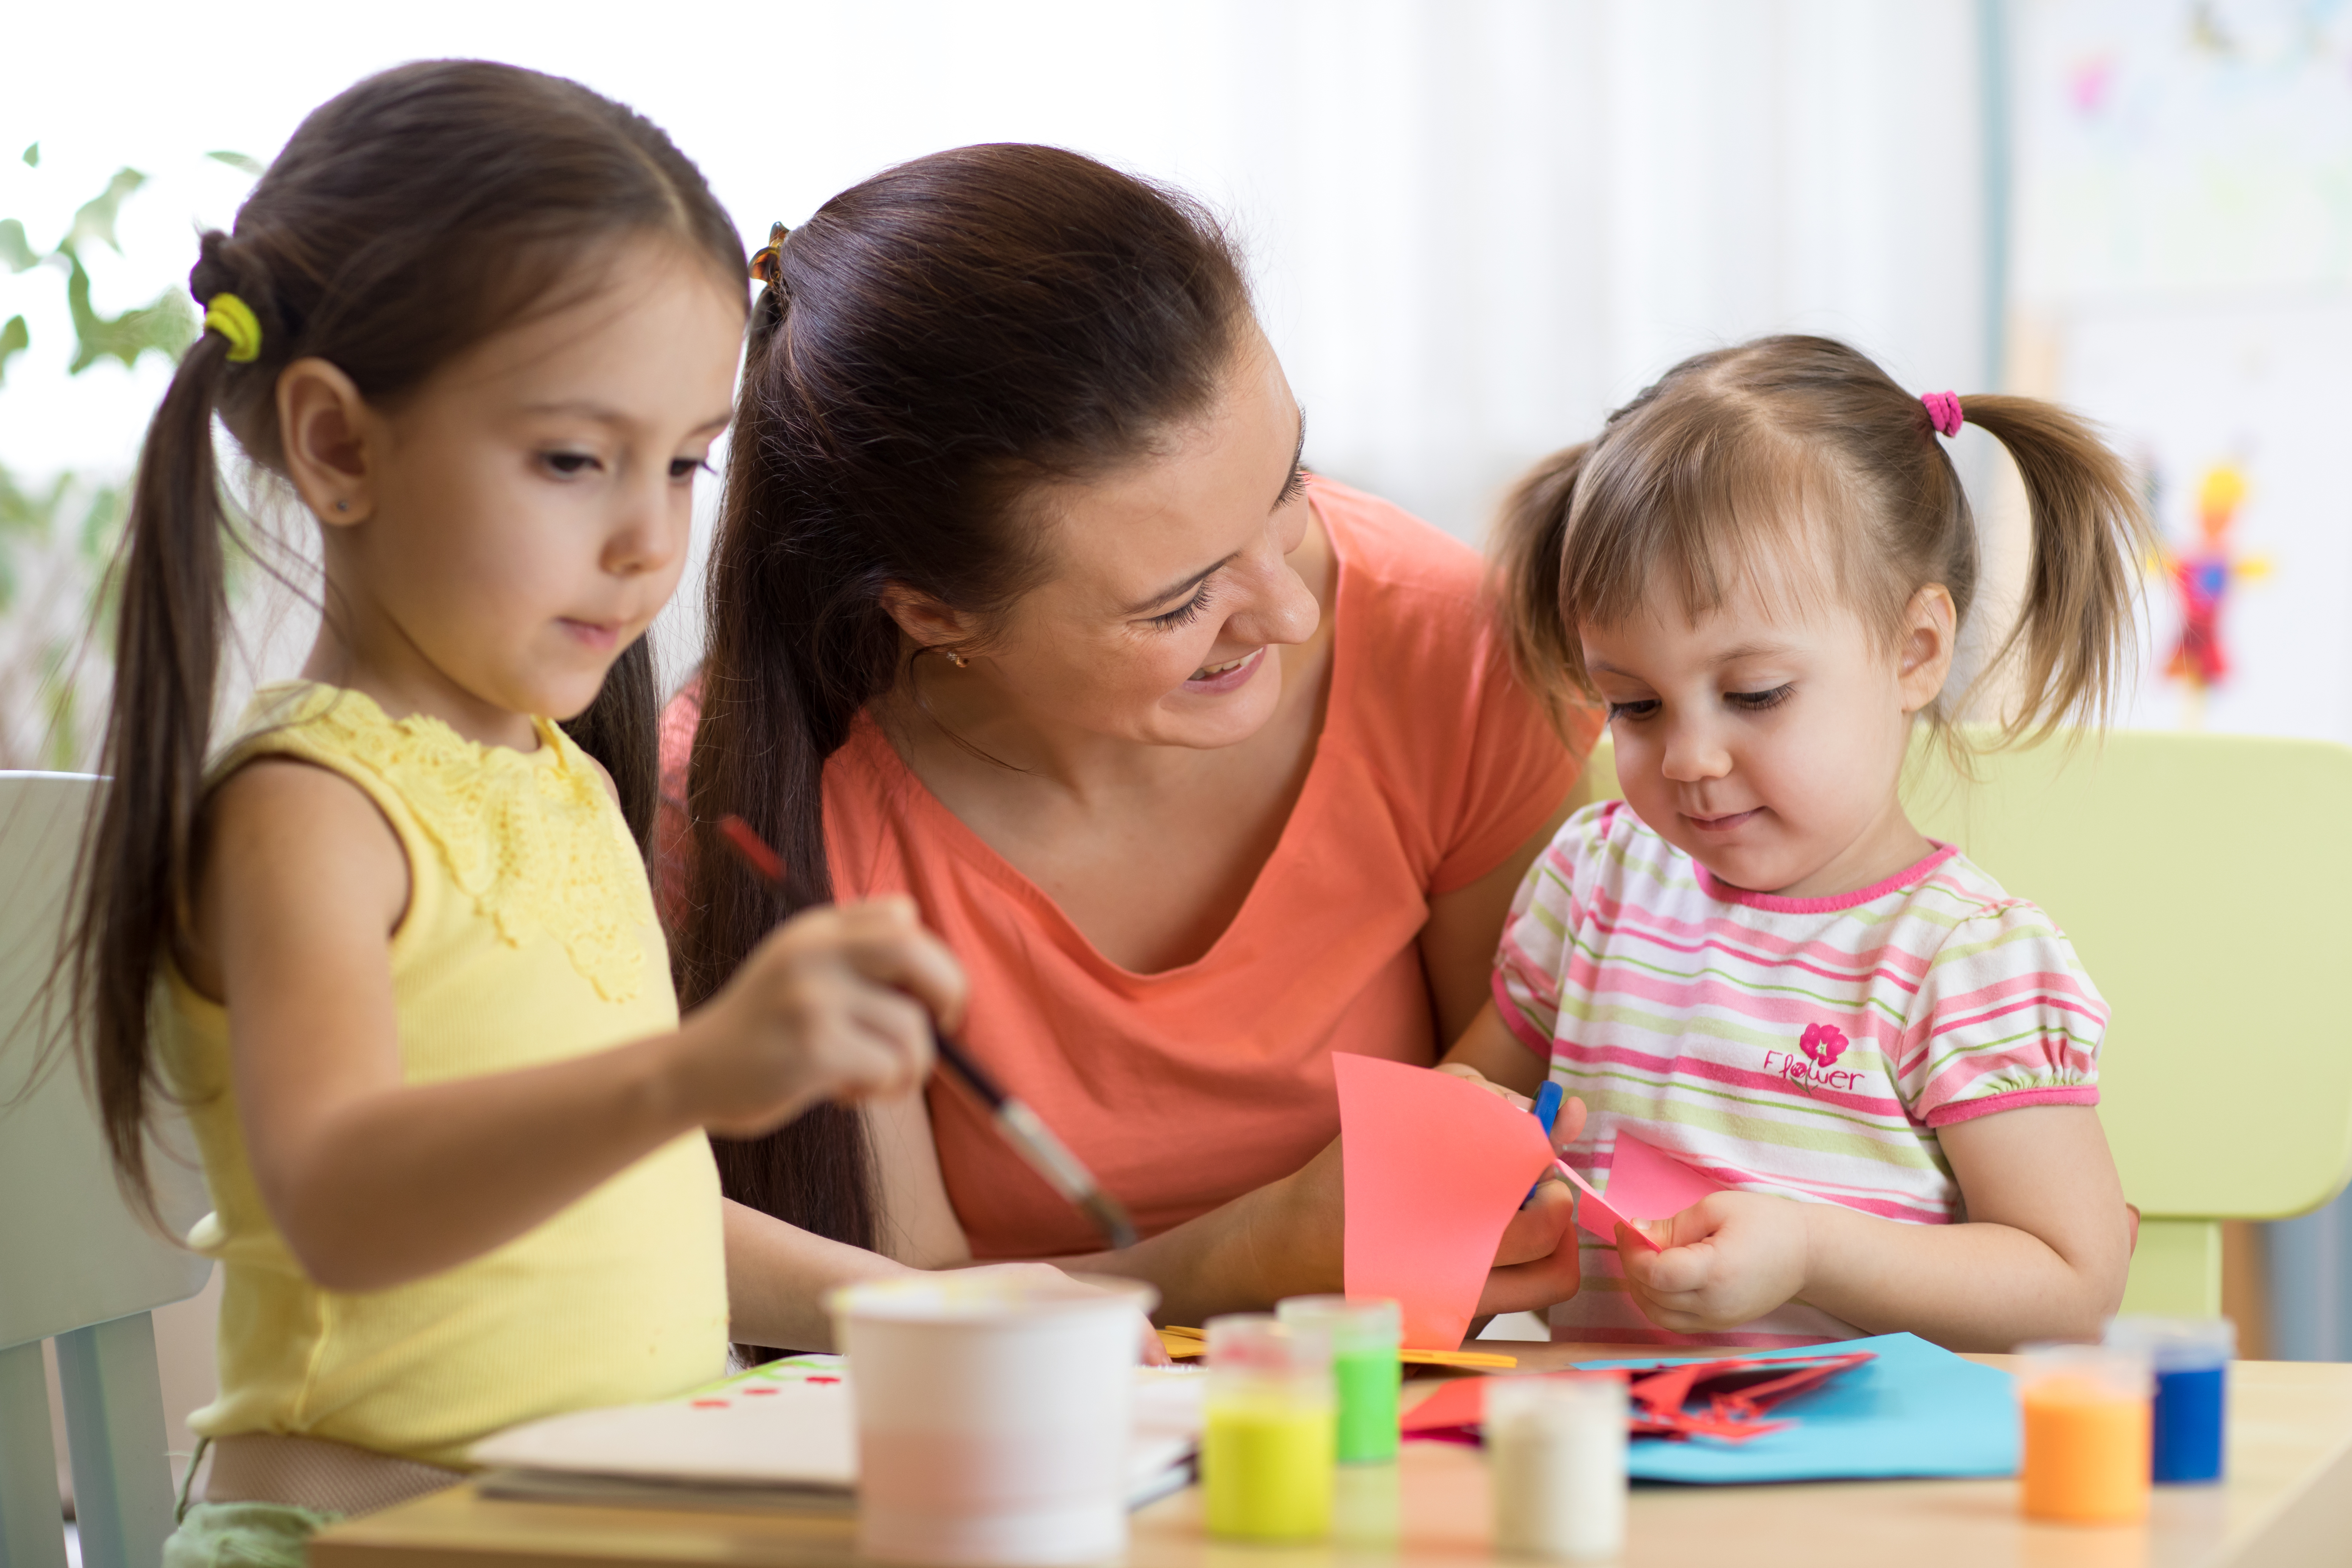 woman sitting with and smiling at two young girls as they do arts and crafts